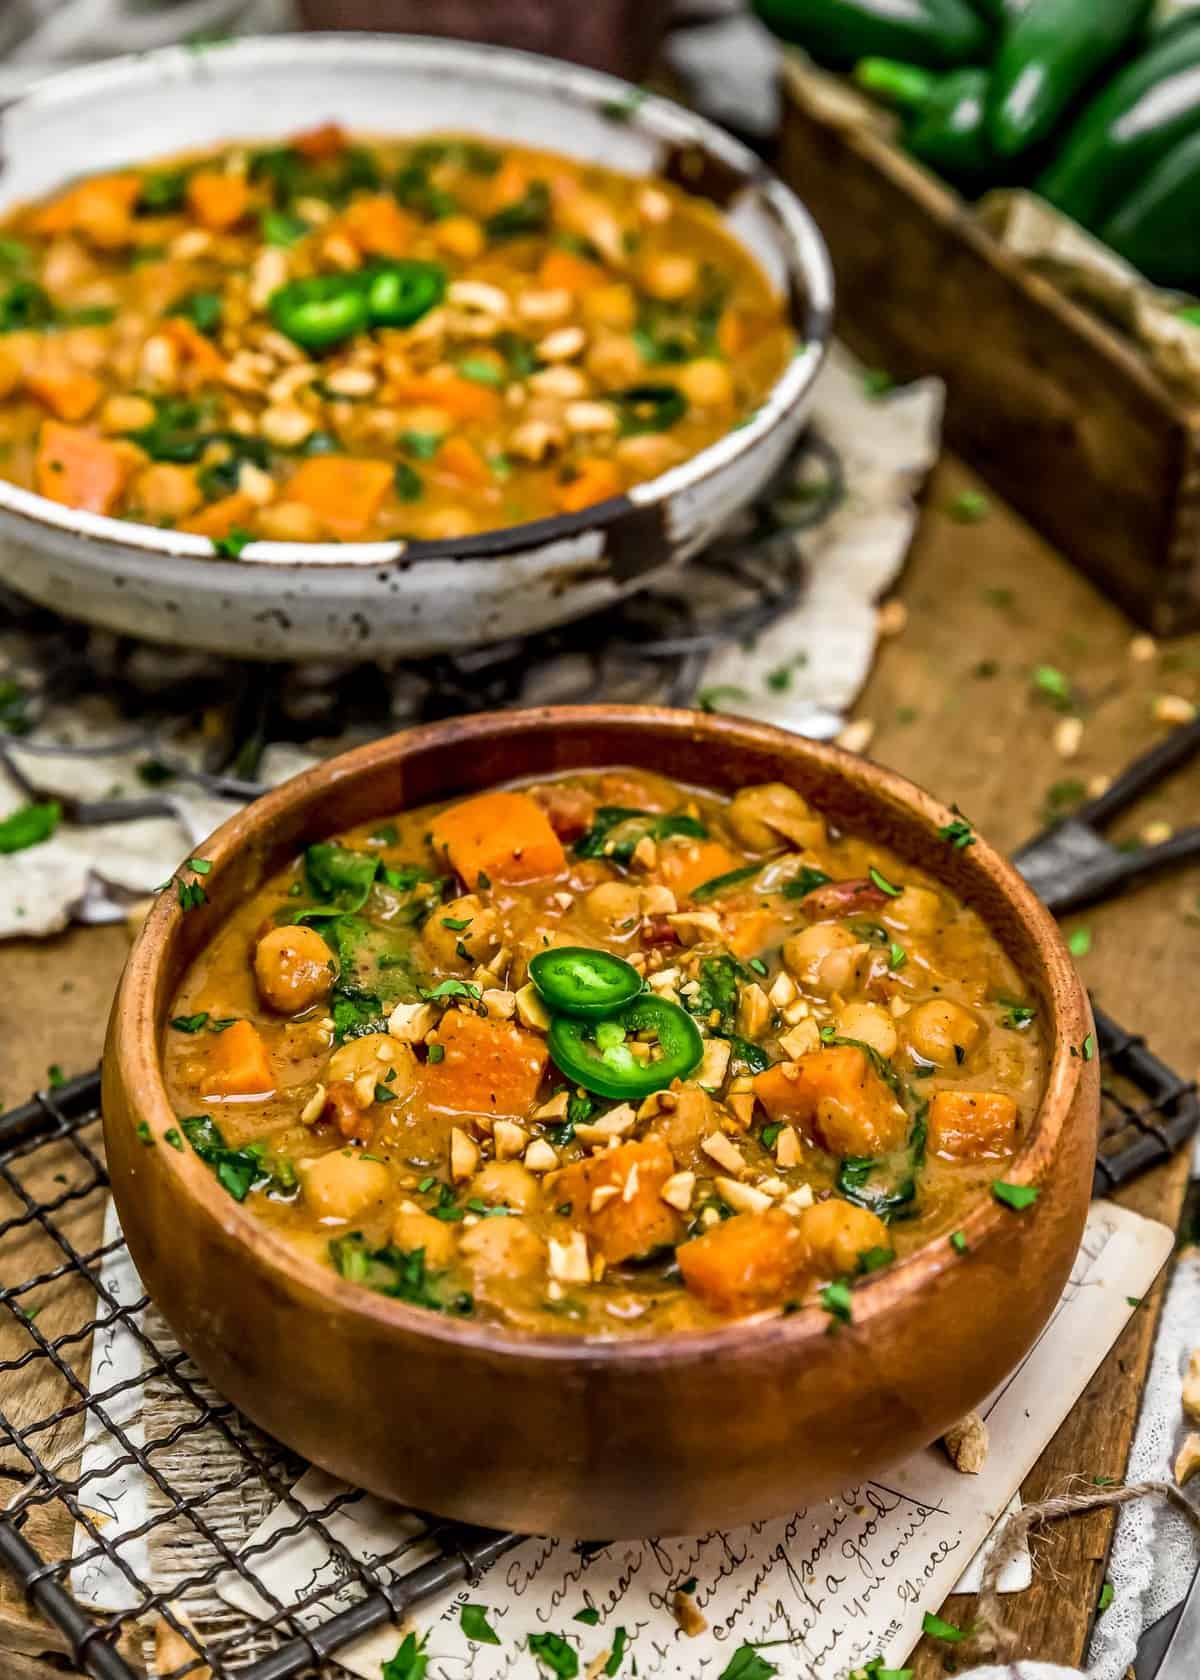 Bowls of African Peanut Stew